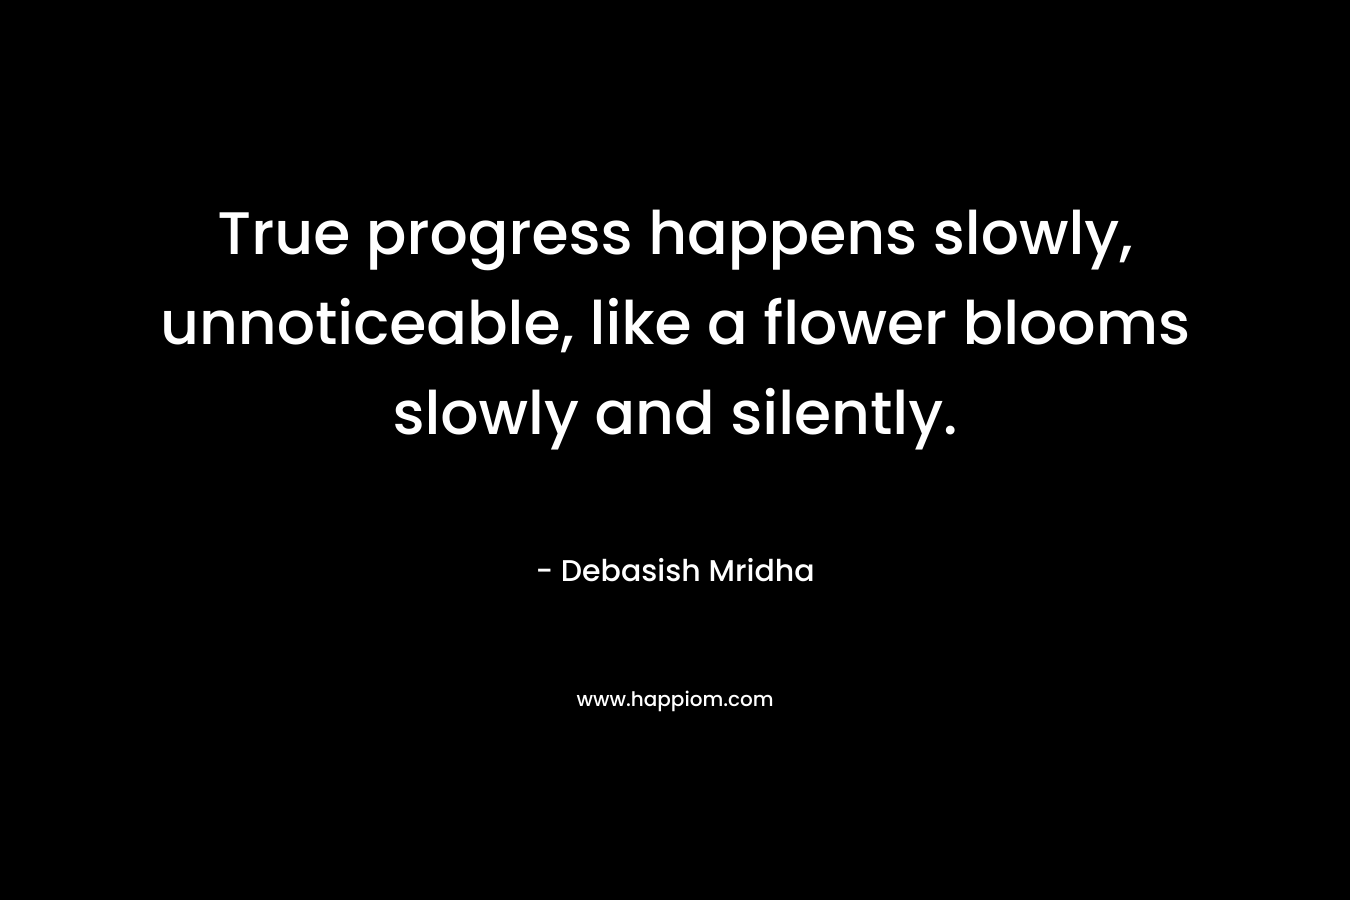 True progress happens slowly, unnoticeable, like a flower blooms slowly and silently.